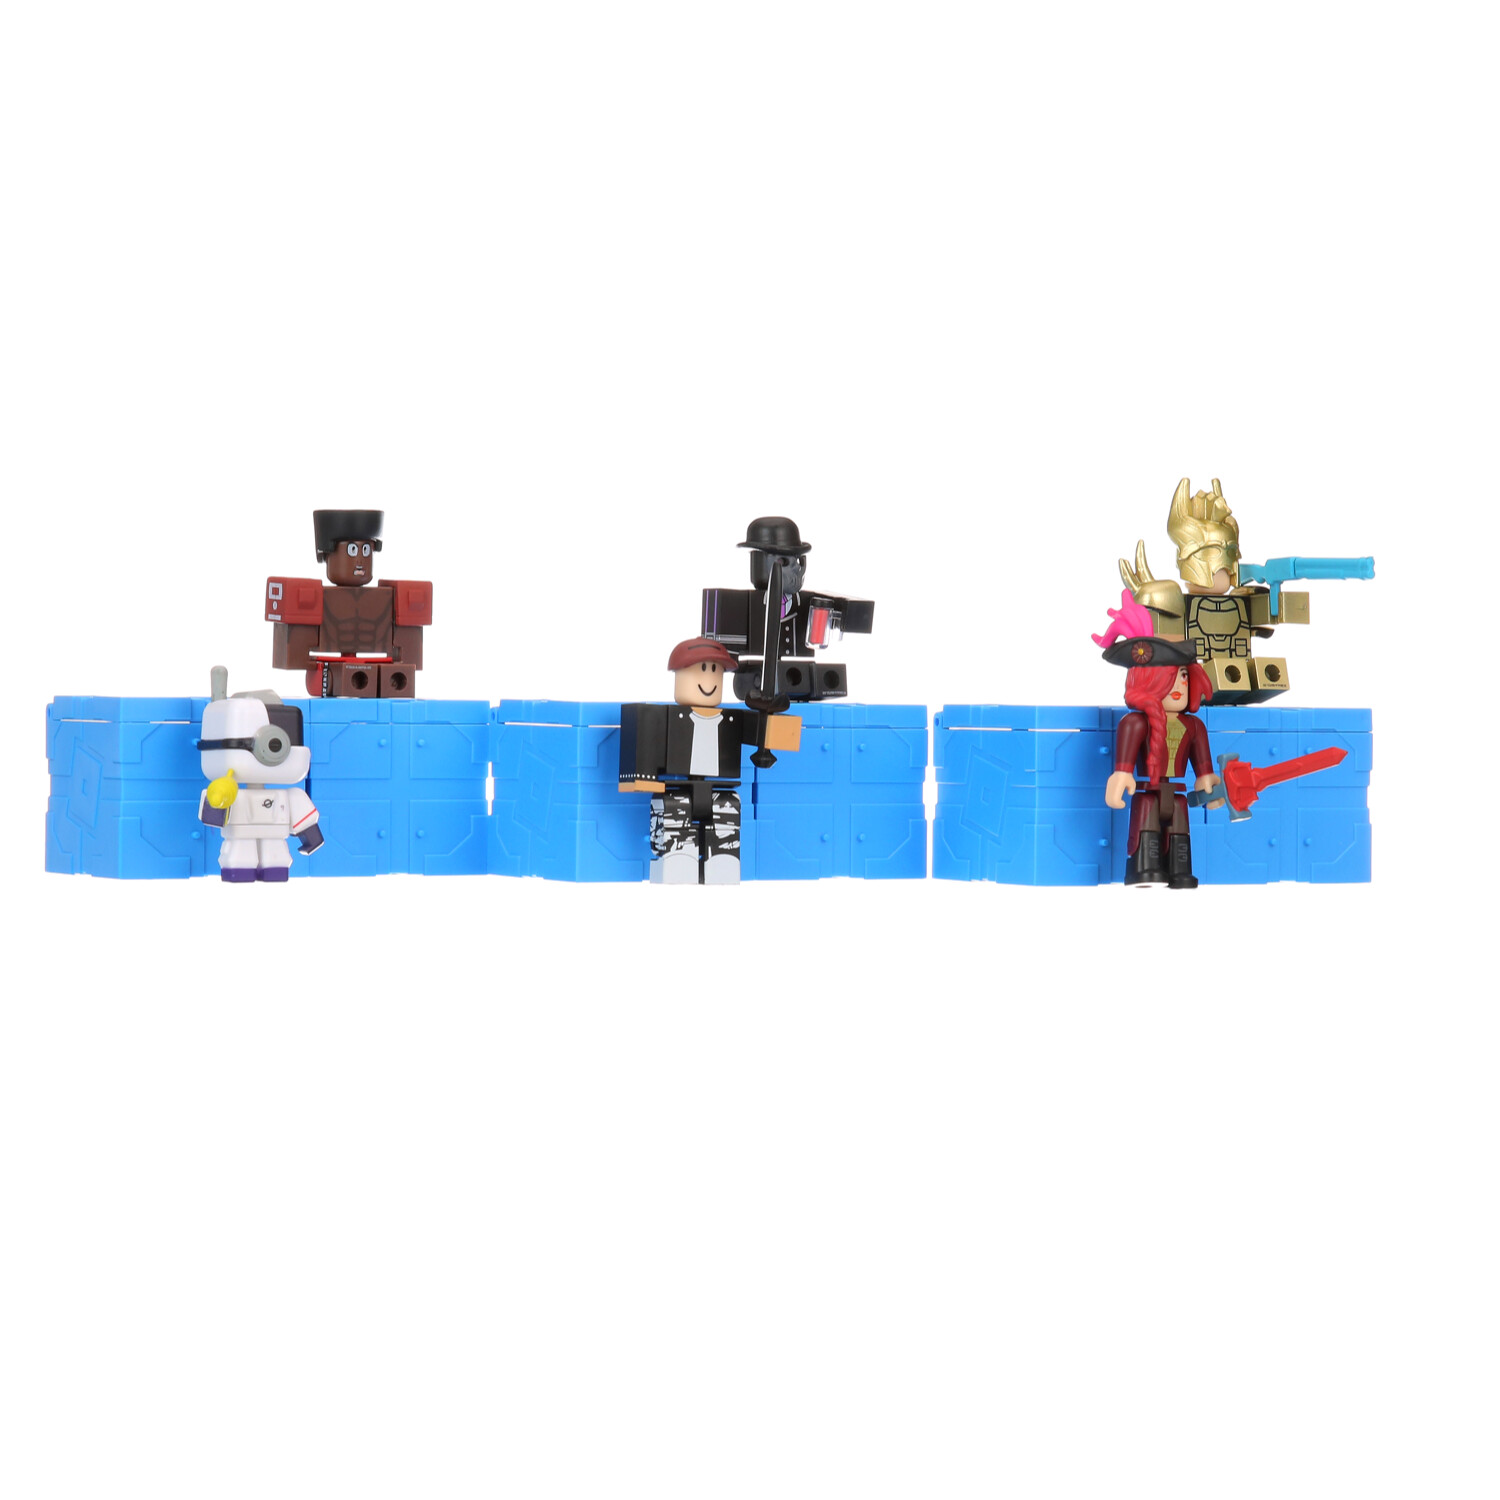 Roblox Action Collection - Series 11 Mystery Figure 6-Pack [Includes 6  Exclusive Virtual Items]